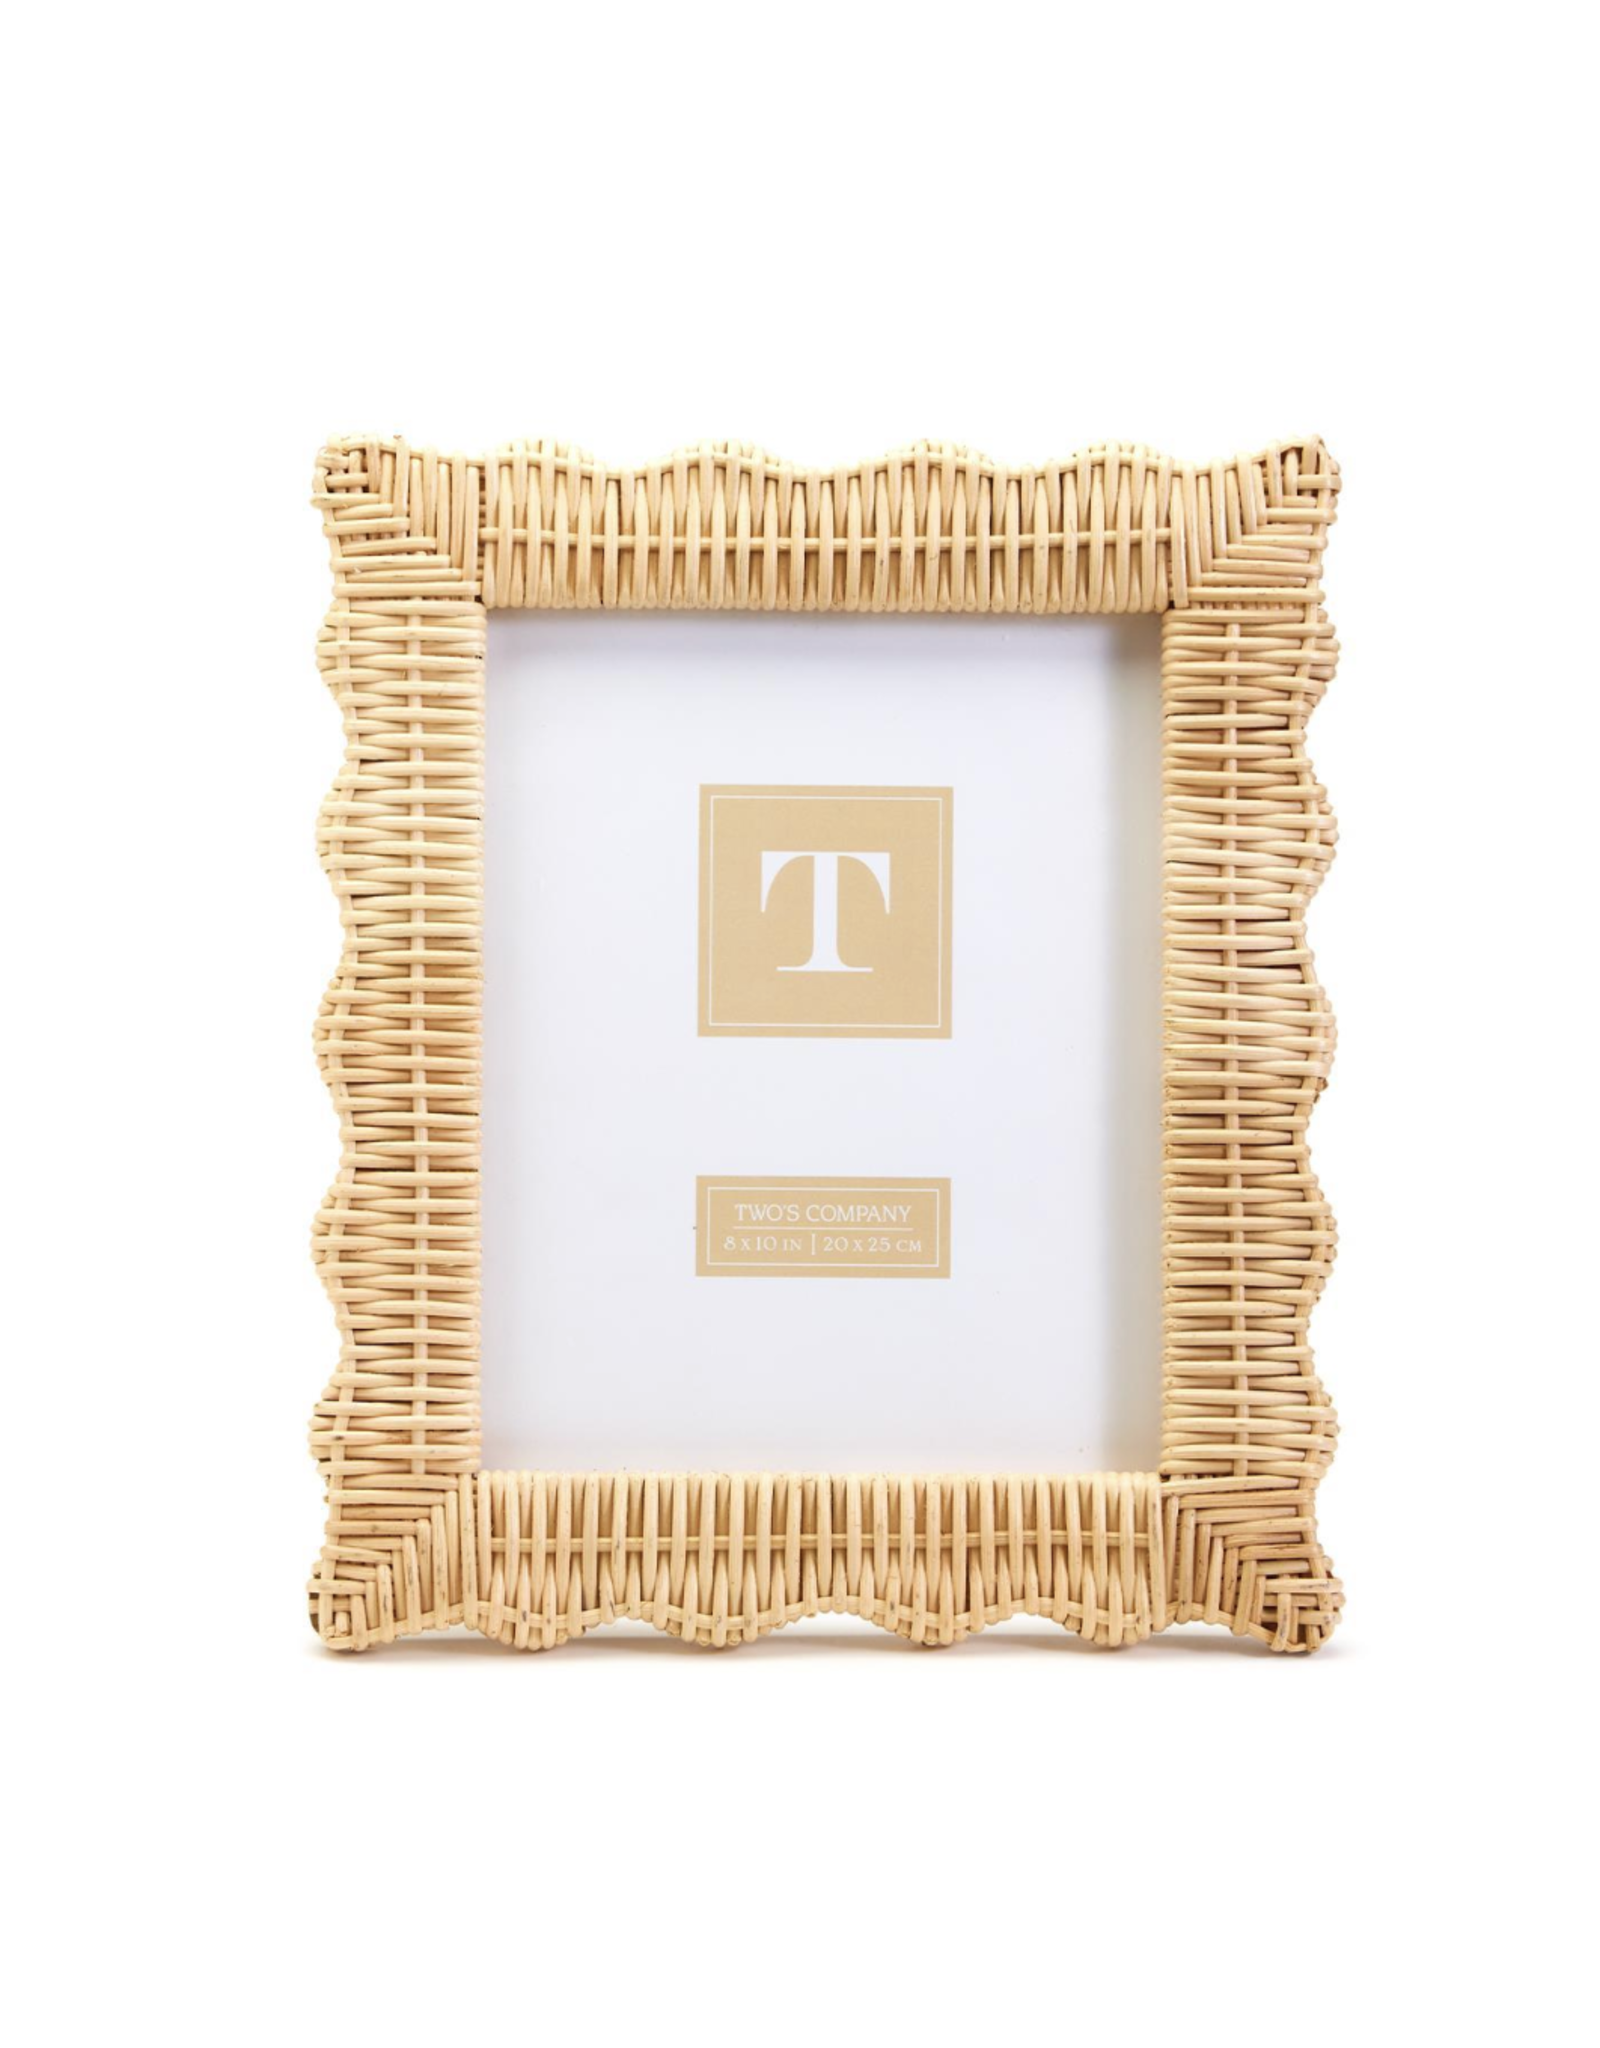 Decor Shop by Place & Gather Wicker Weave 8x10 Frame